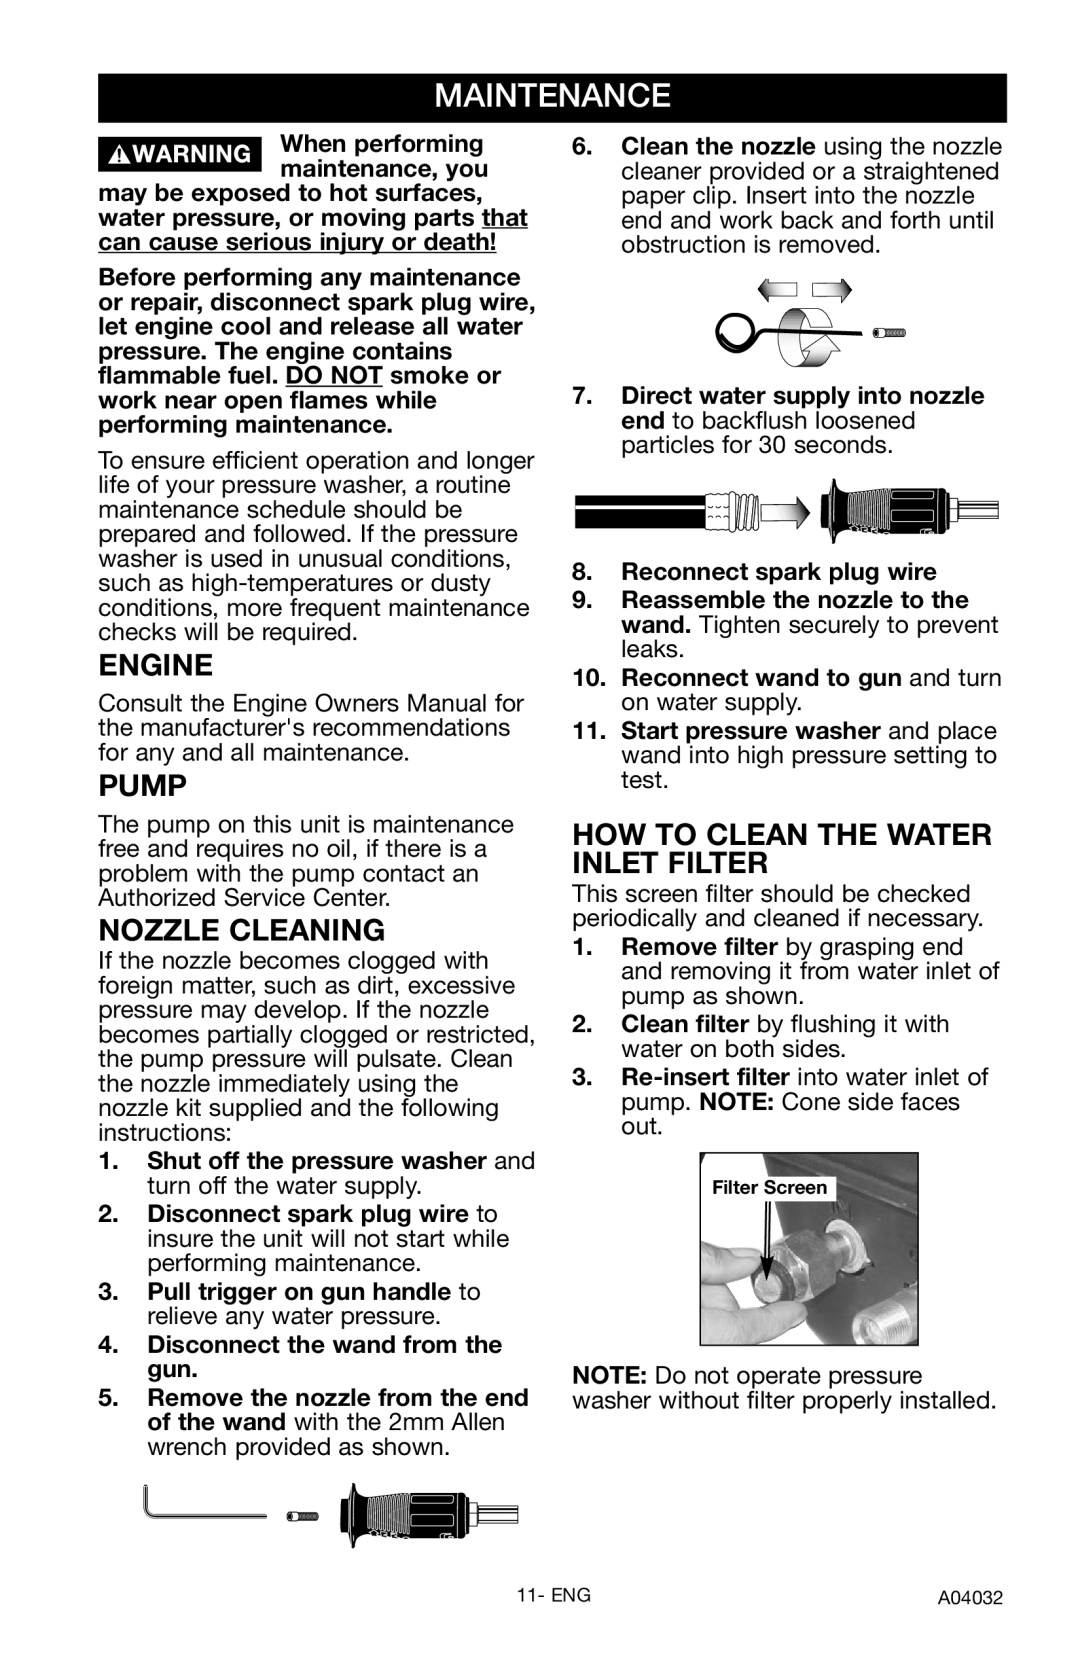 Delta DTT2450 instruction manual Maintenance, Engine, Pump, Nozzle Cleaning, How To Clean The Water Inlet Filter 